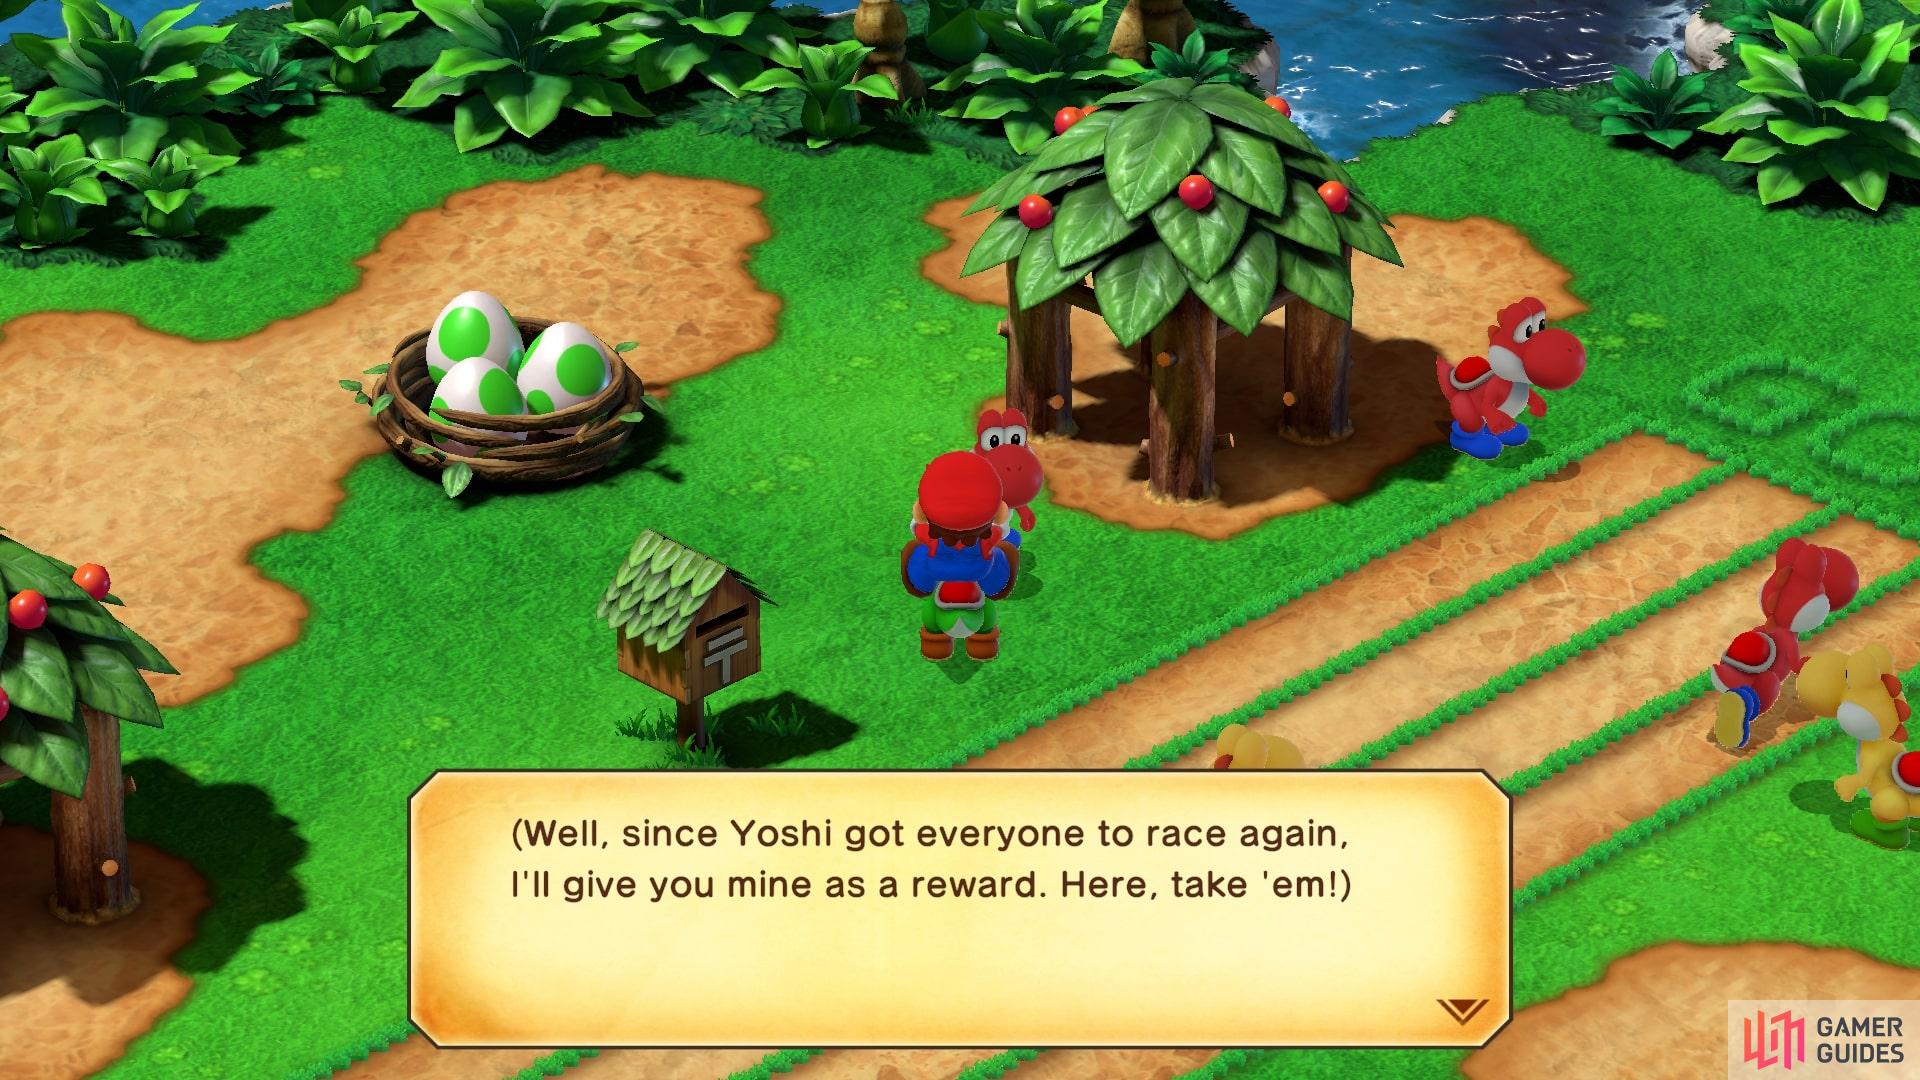 If you run out of Yoshi Cookies, speak to the red yoshi near the mailbox on the left.